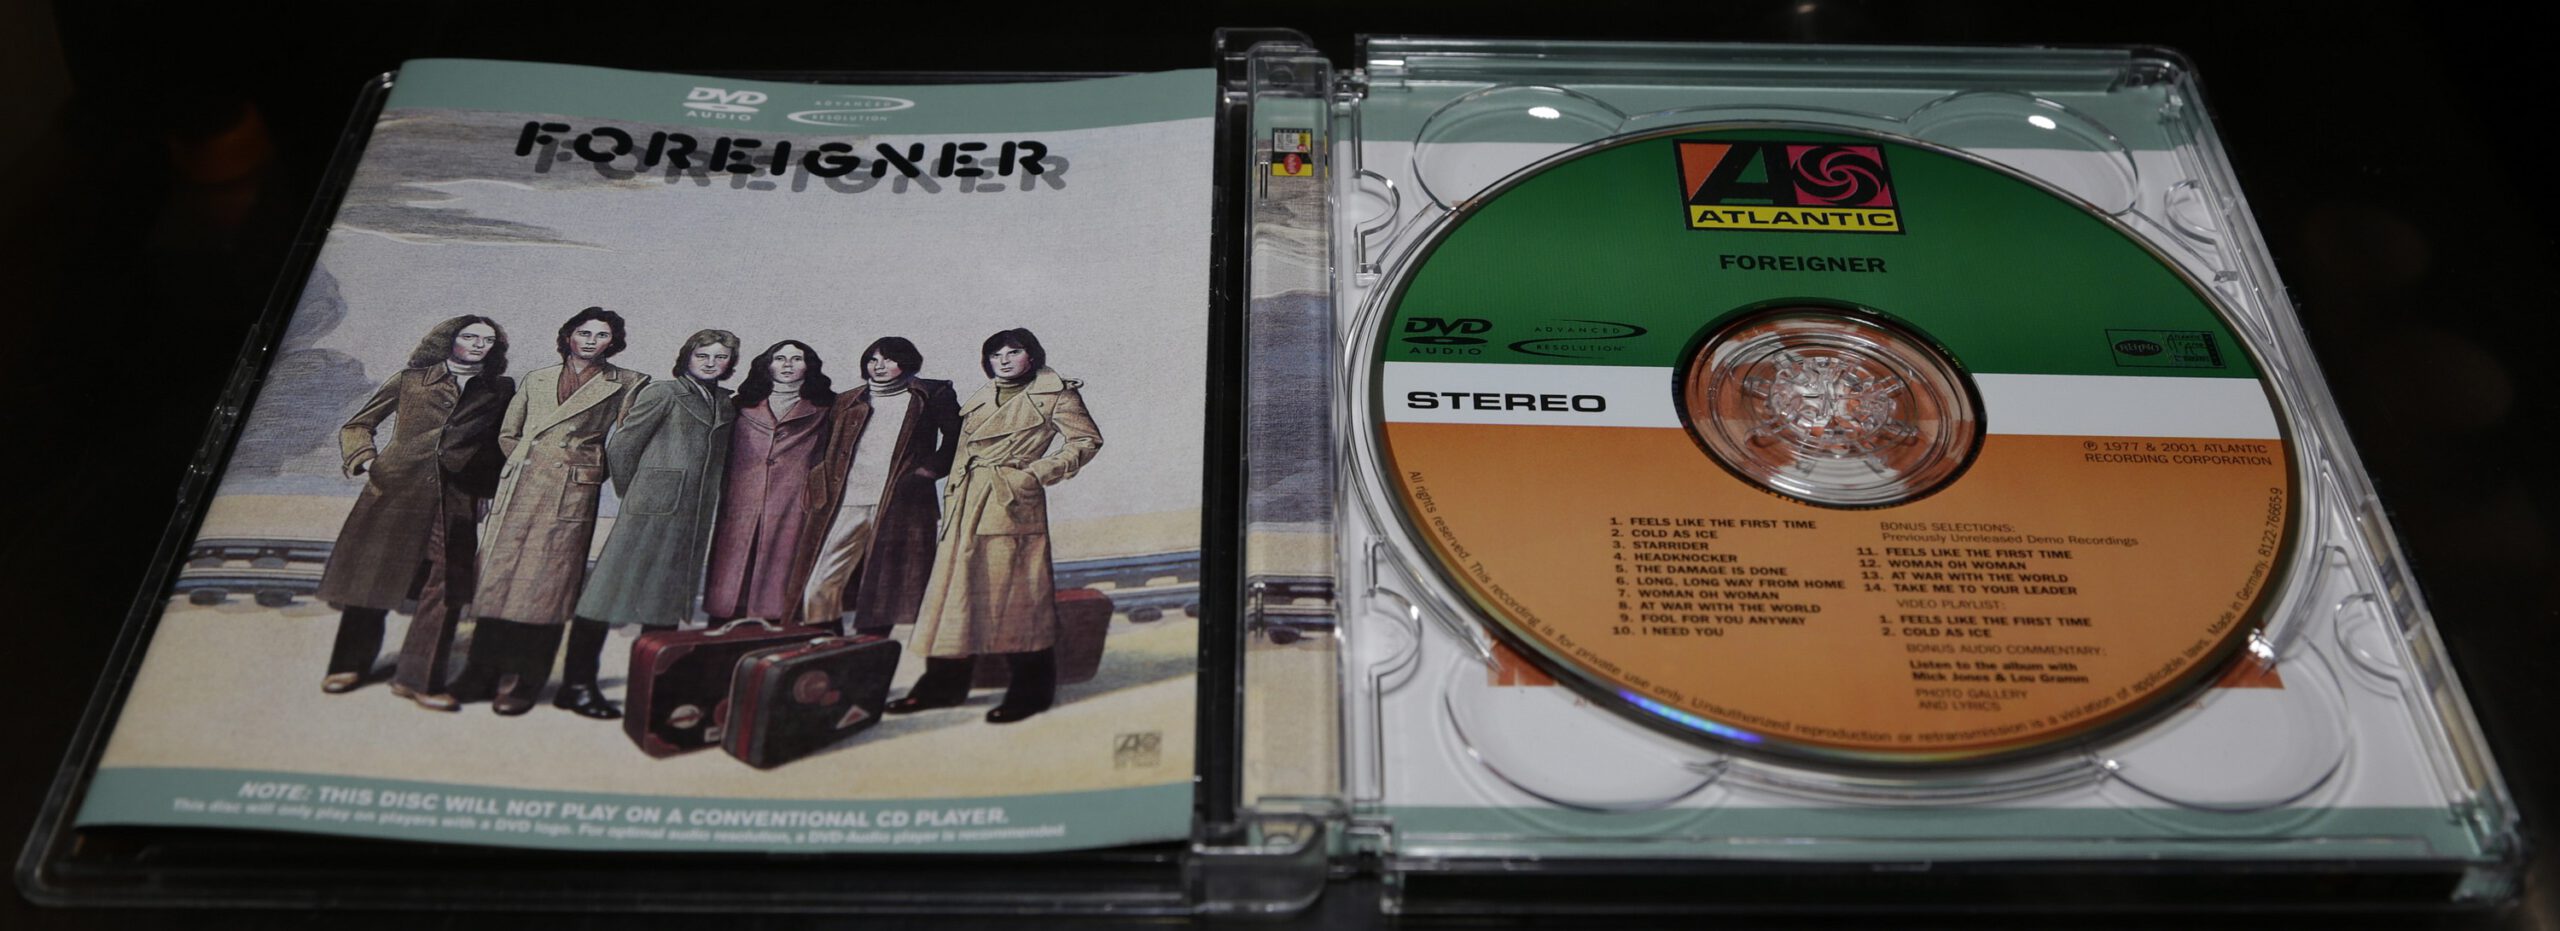 Foreigner Foreigner DVD Audio Surround Mix Review